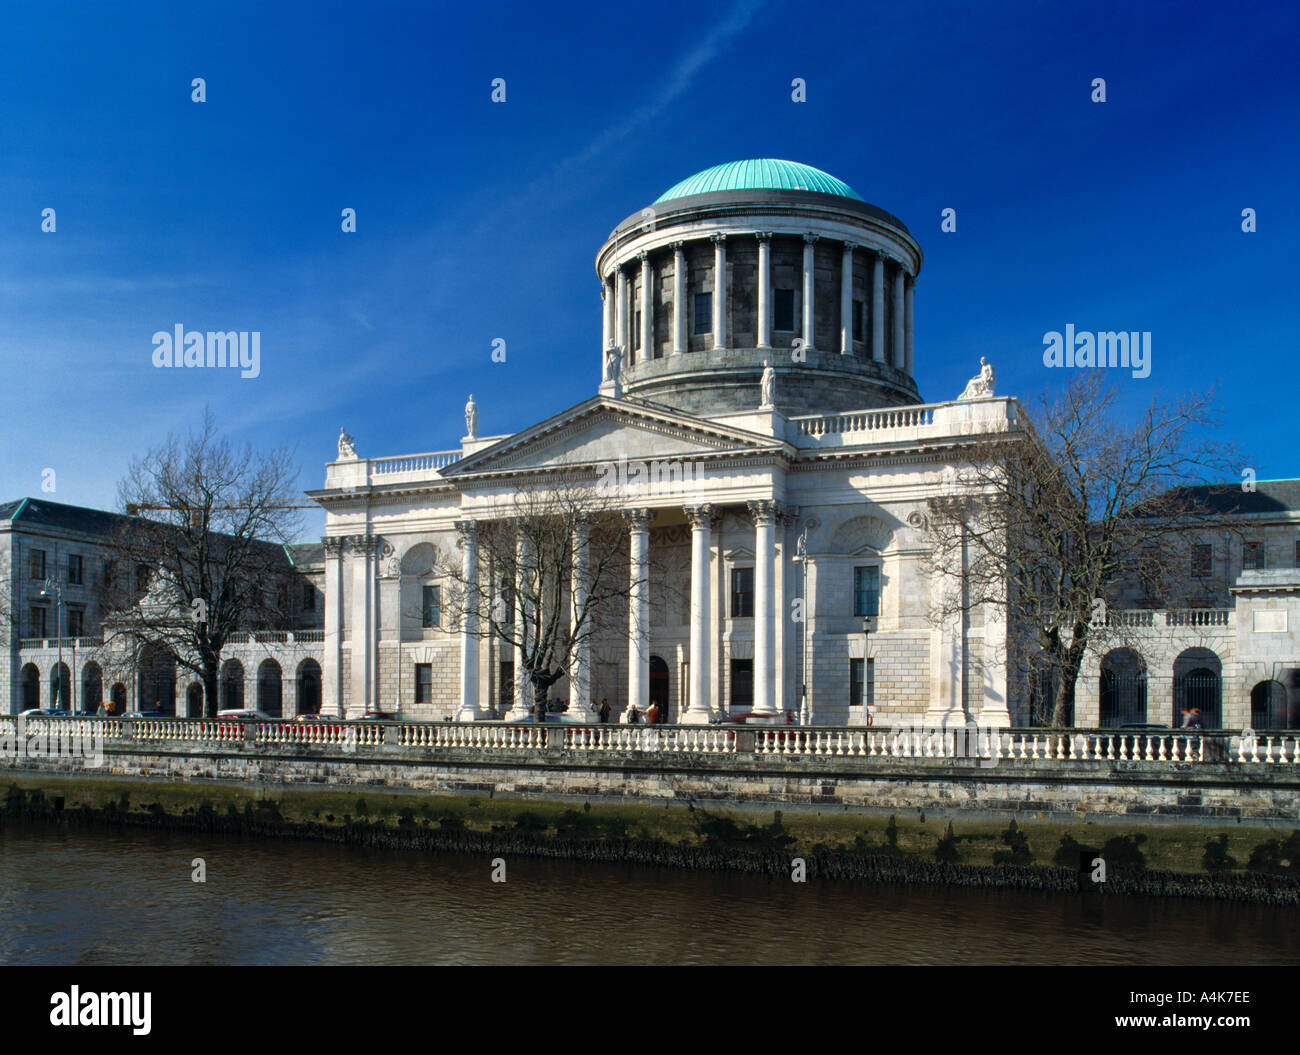 the Four Courts the premier Irish law courts on banks of the Liffey river - Dublin, Ireland Stock Photo